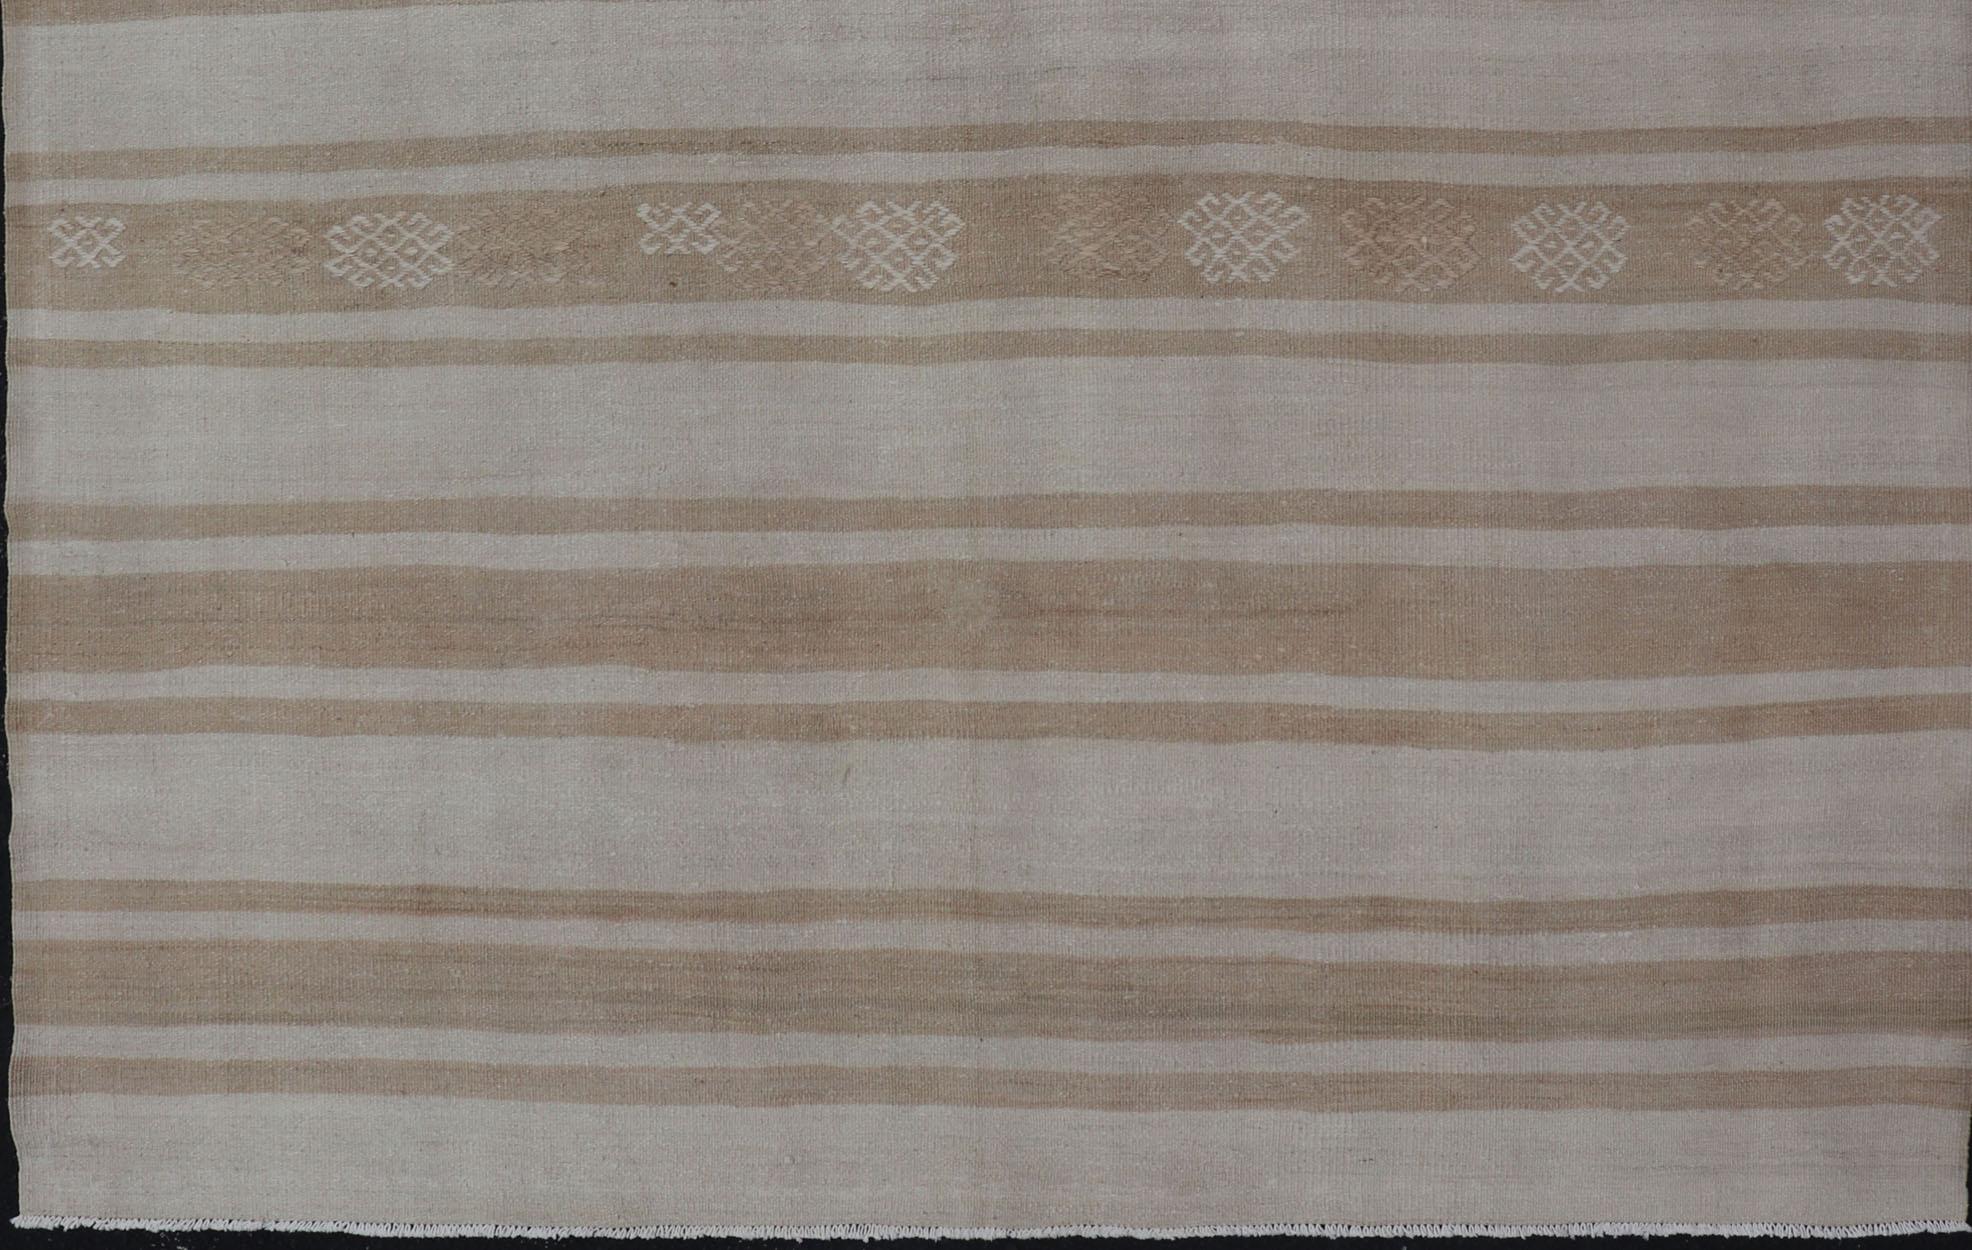 Square Flat-Weave Kilim Vintage Rug from Turkey with Horizontal Stripes in Taupe In Good Condition For Sale In Atlanta, GA